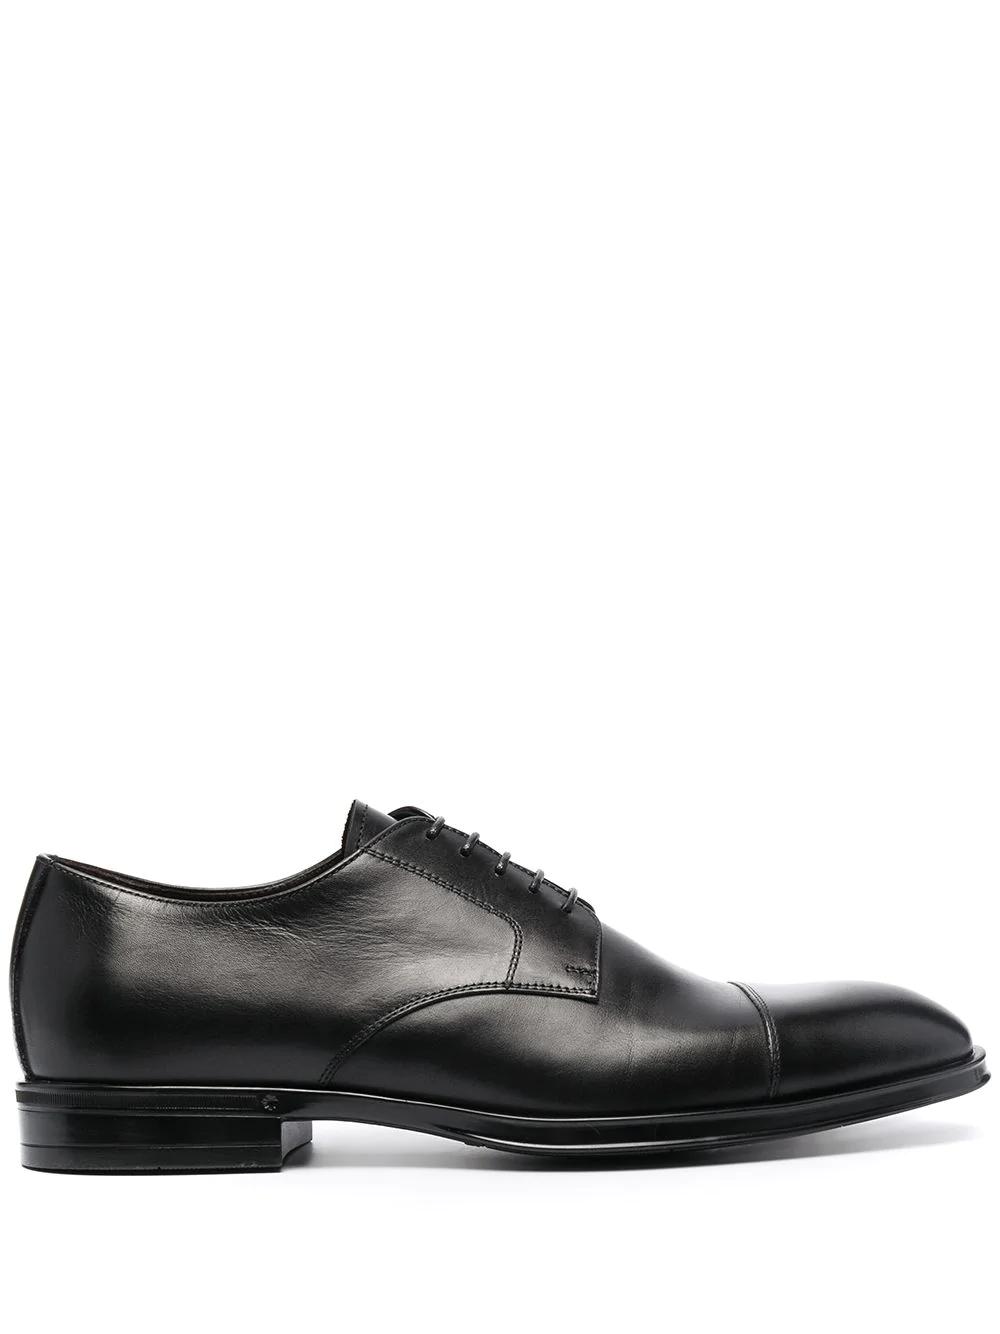 leather derby shoes by CANALI